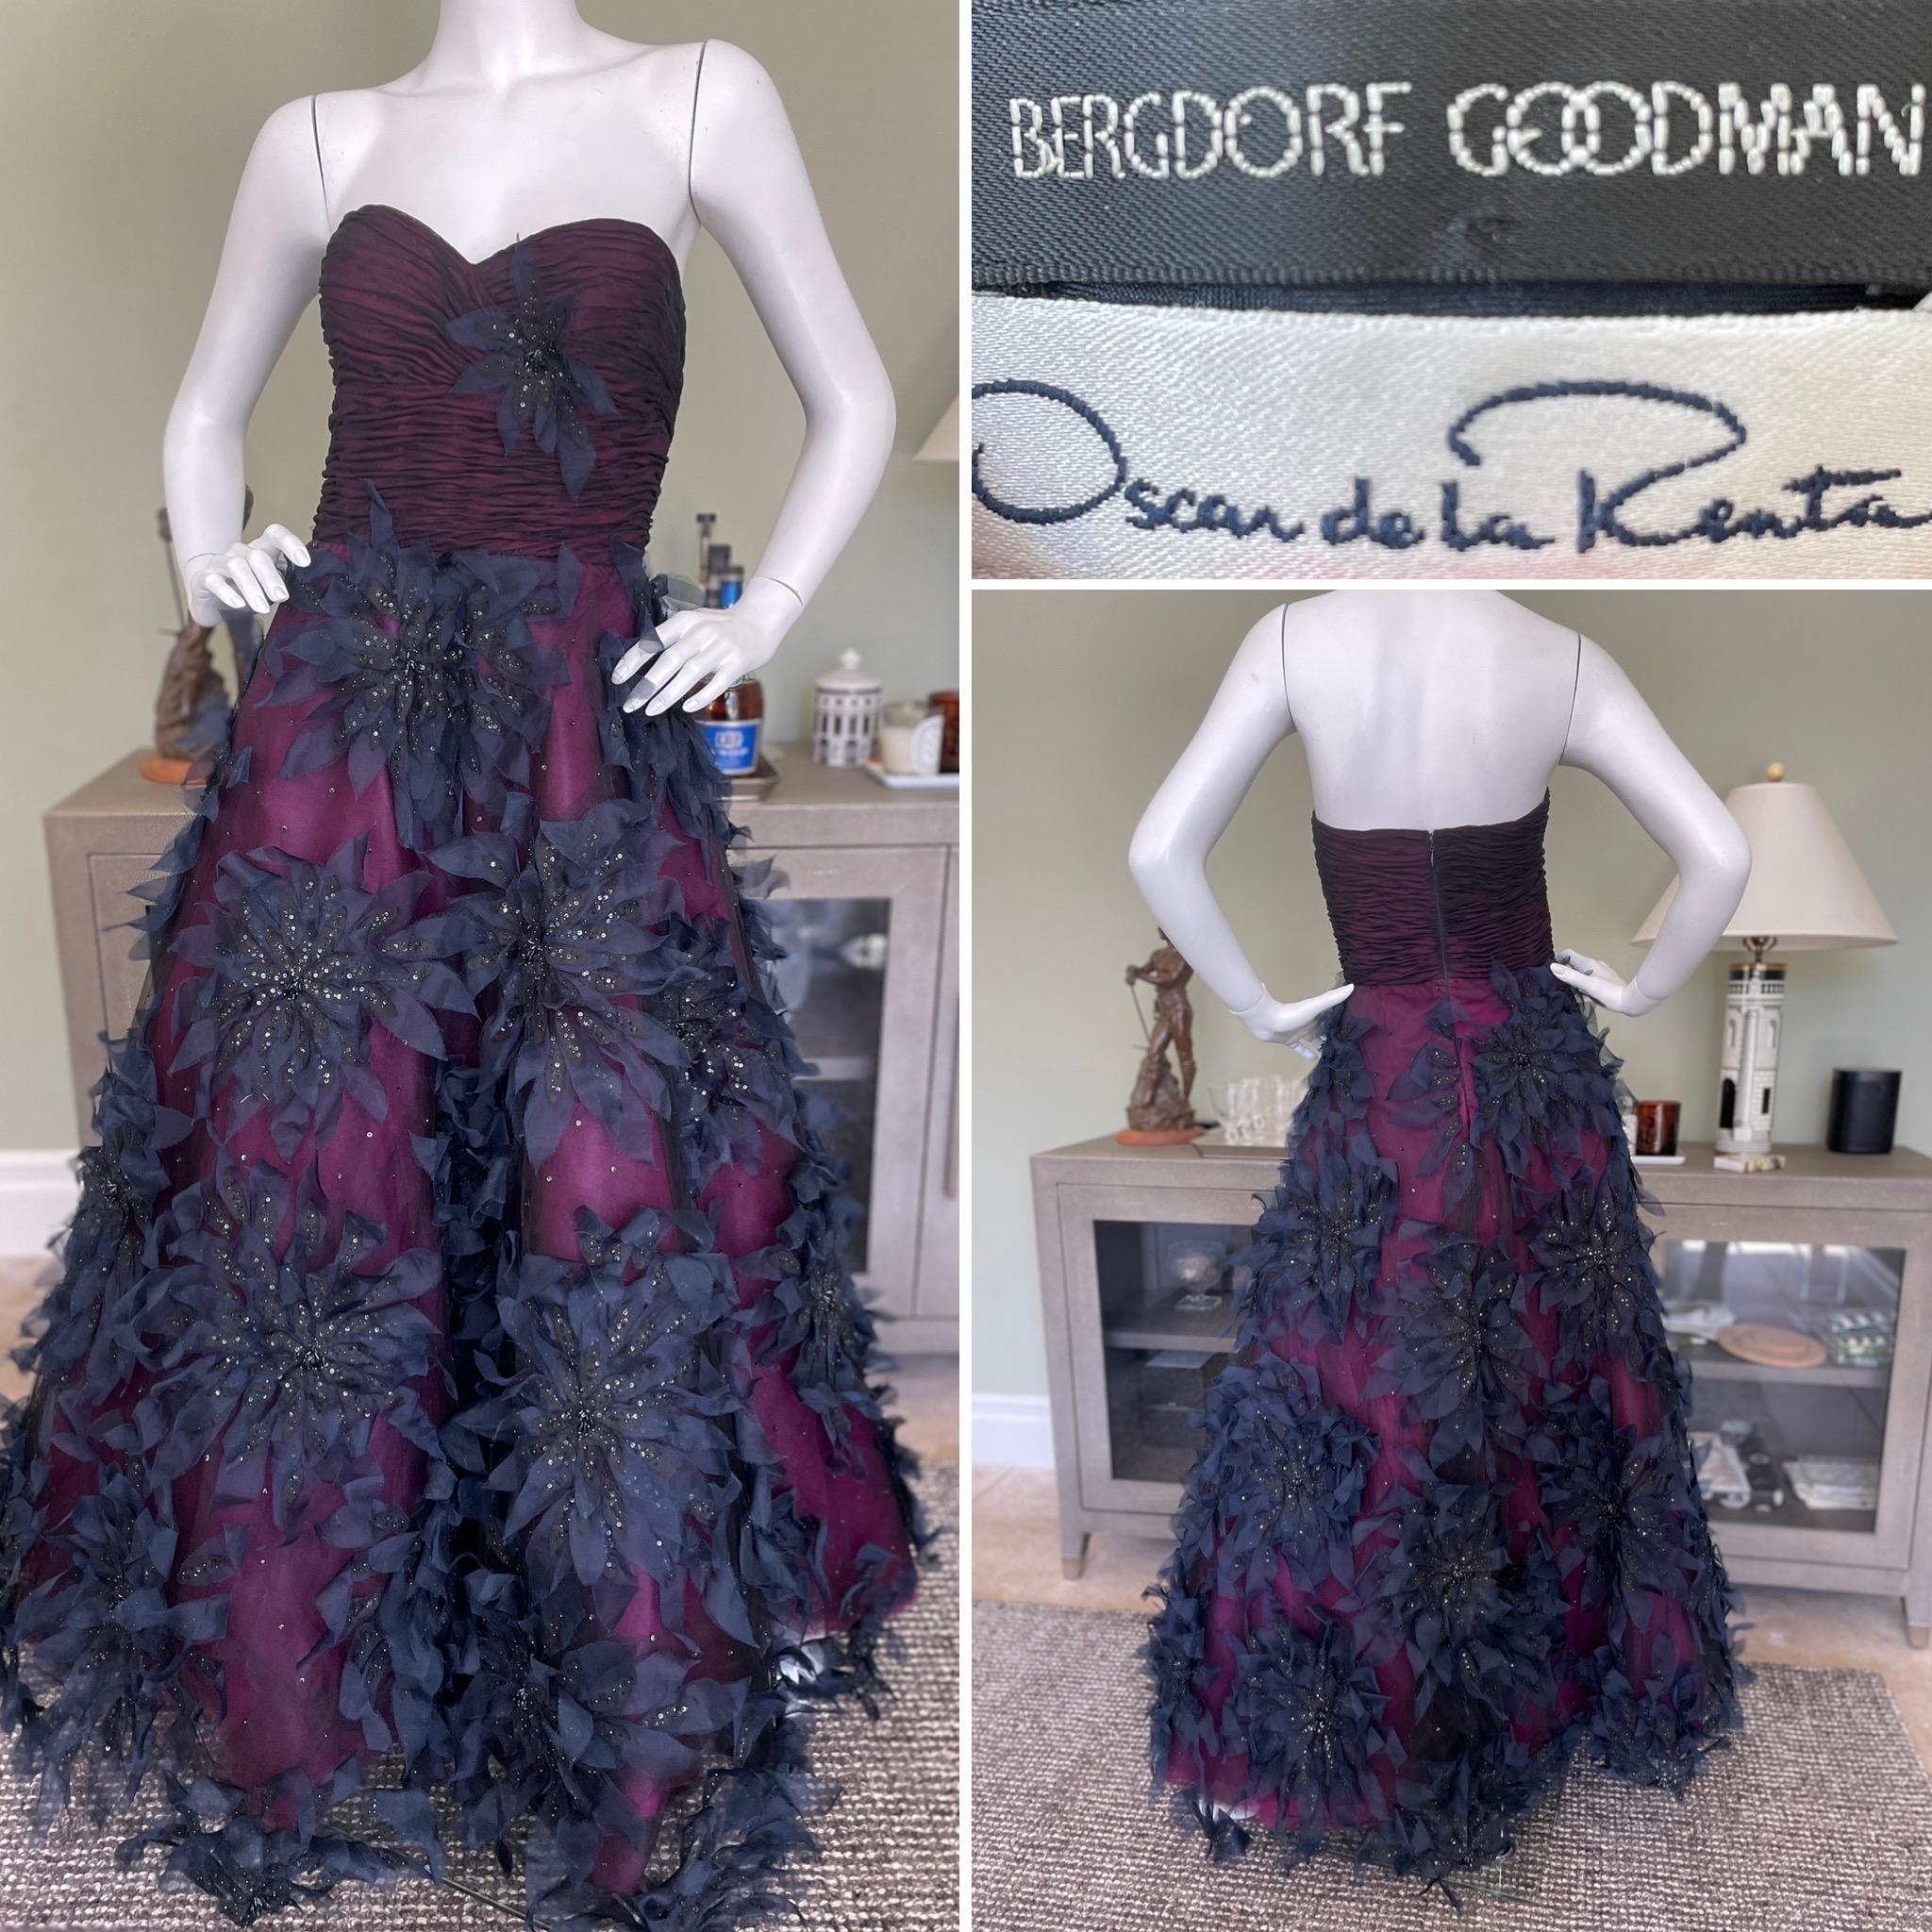 Oscar de la Renta Exquisite Vintage Strapless Ball Gown with 15 Tulle Petticoats
Stunning. Please use the zoom feature to see all the remarkable details.
Ruched corset bodice with 15 layers of tulle petticoats, Hot Pink and Navy Blue , with